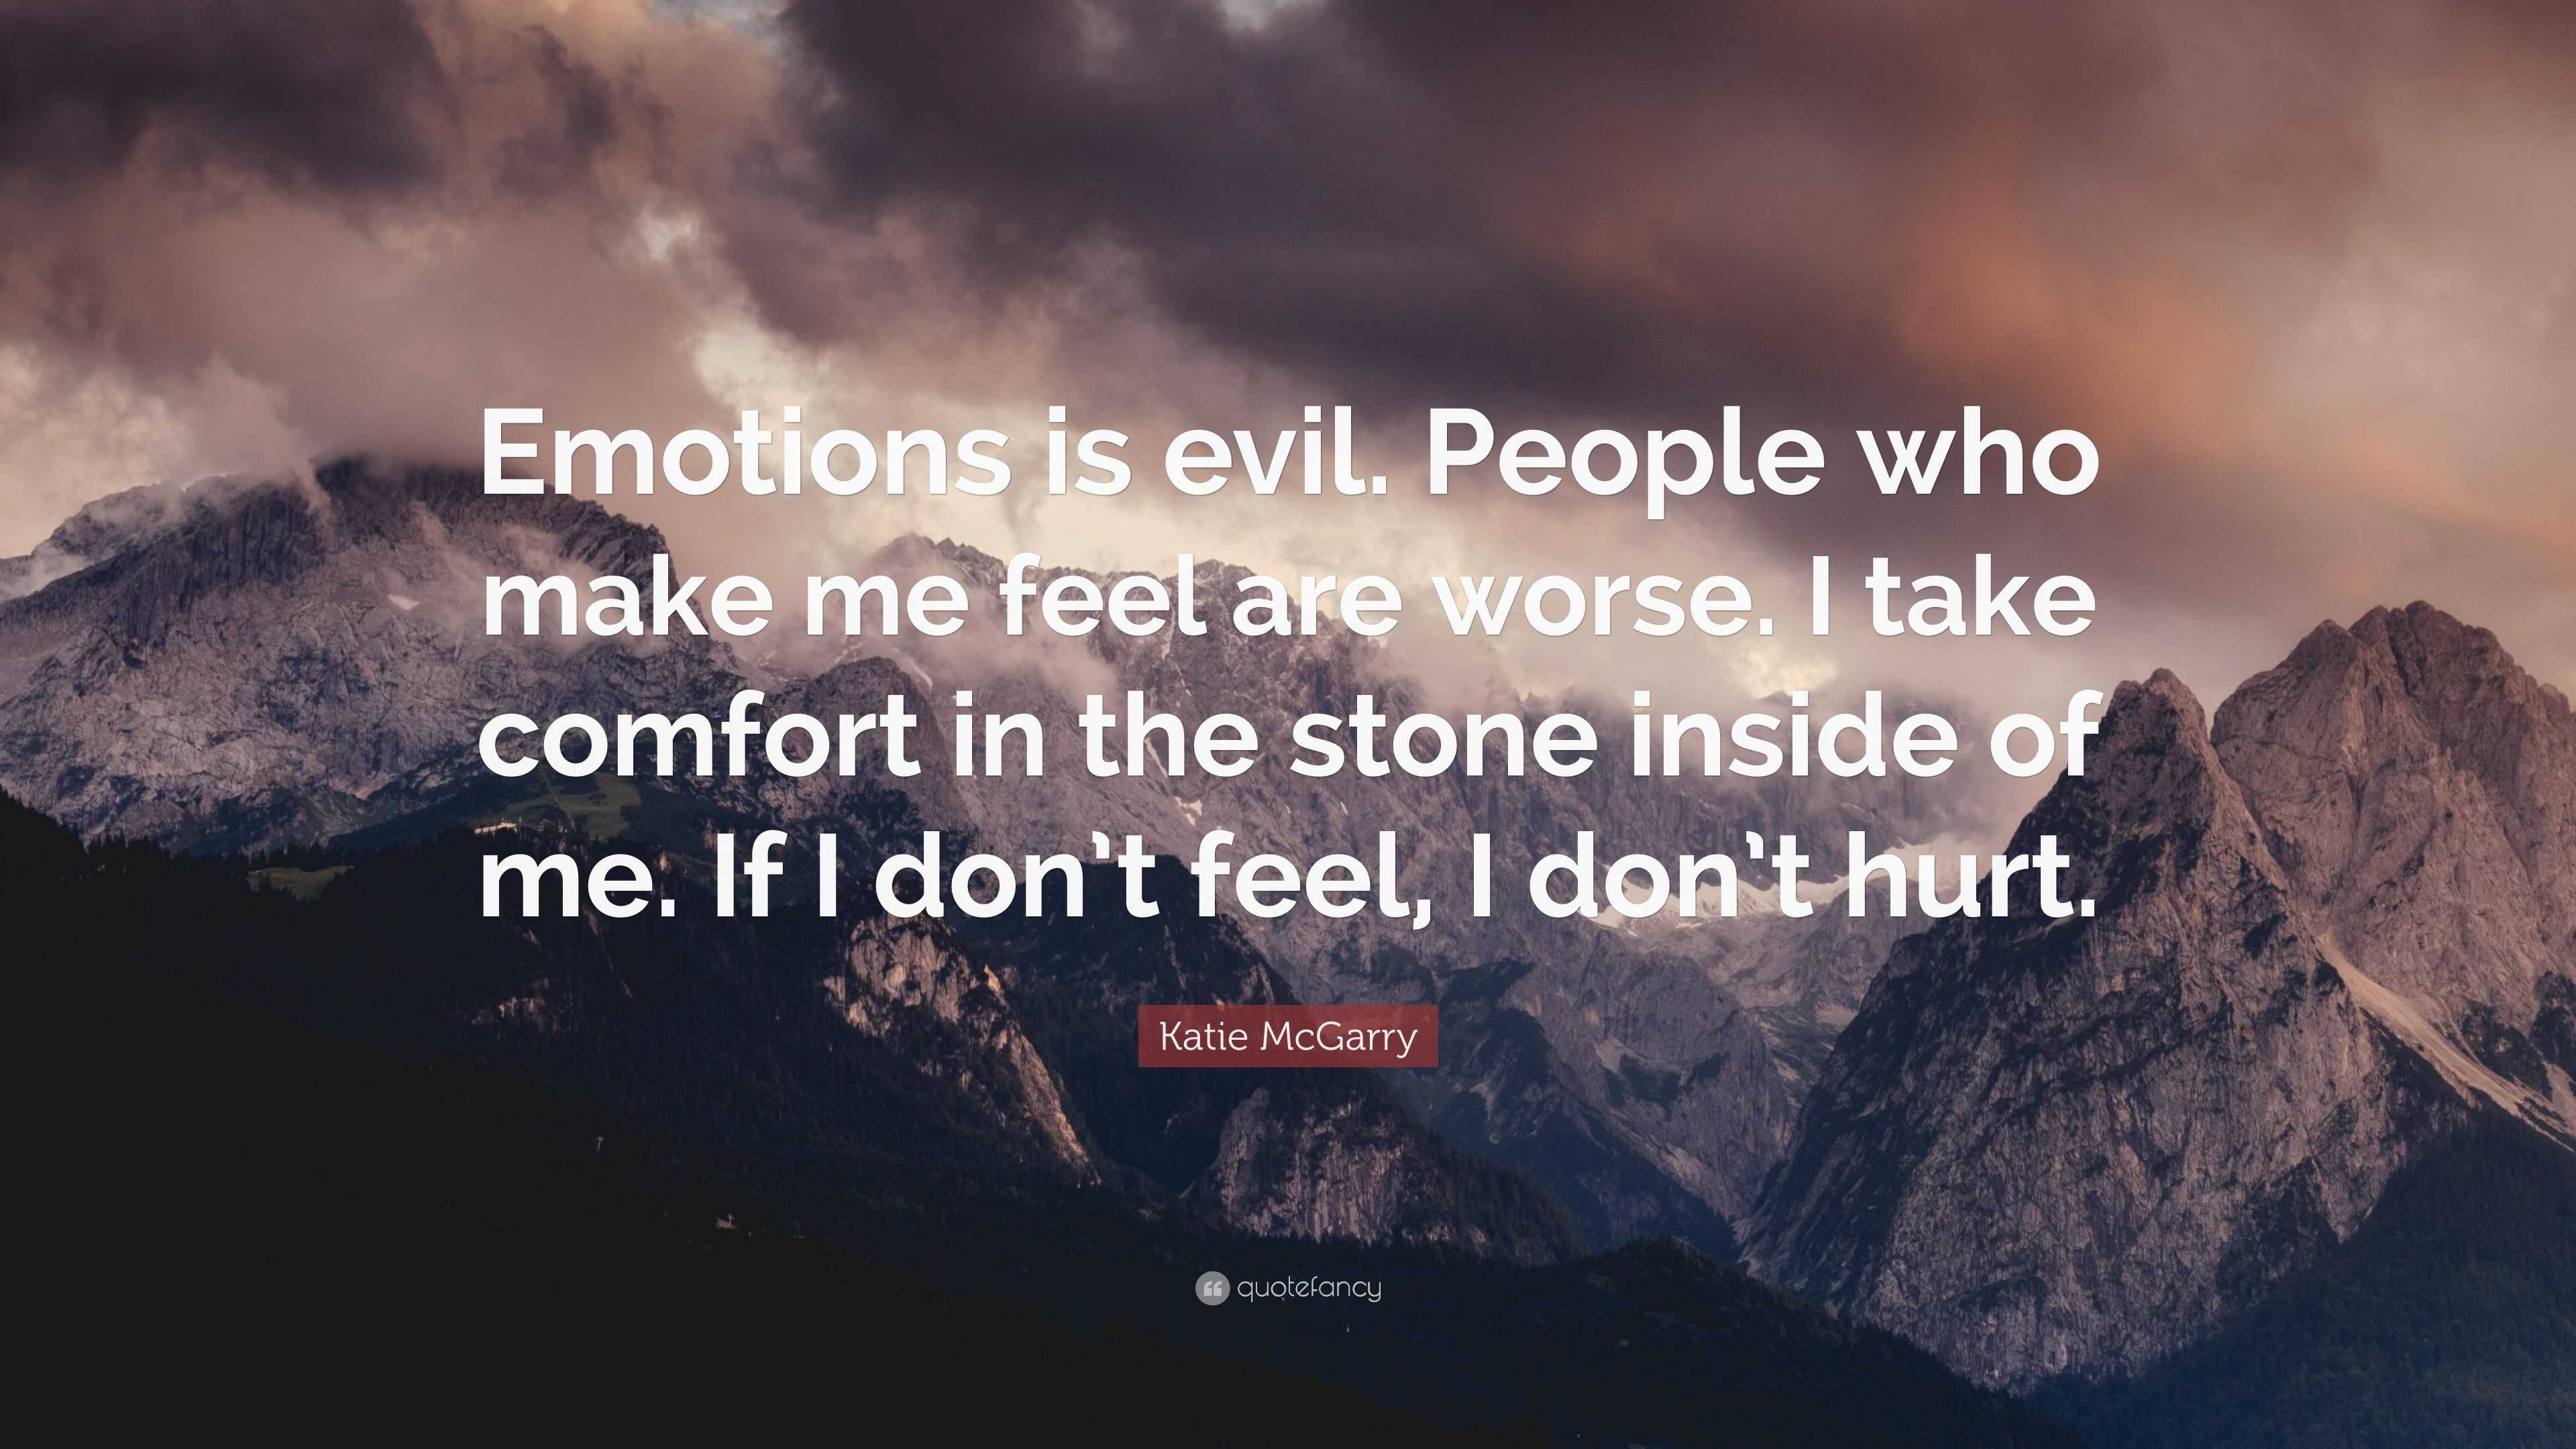 quotes about being evil inside